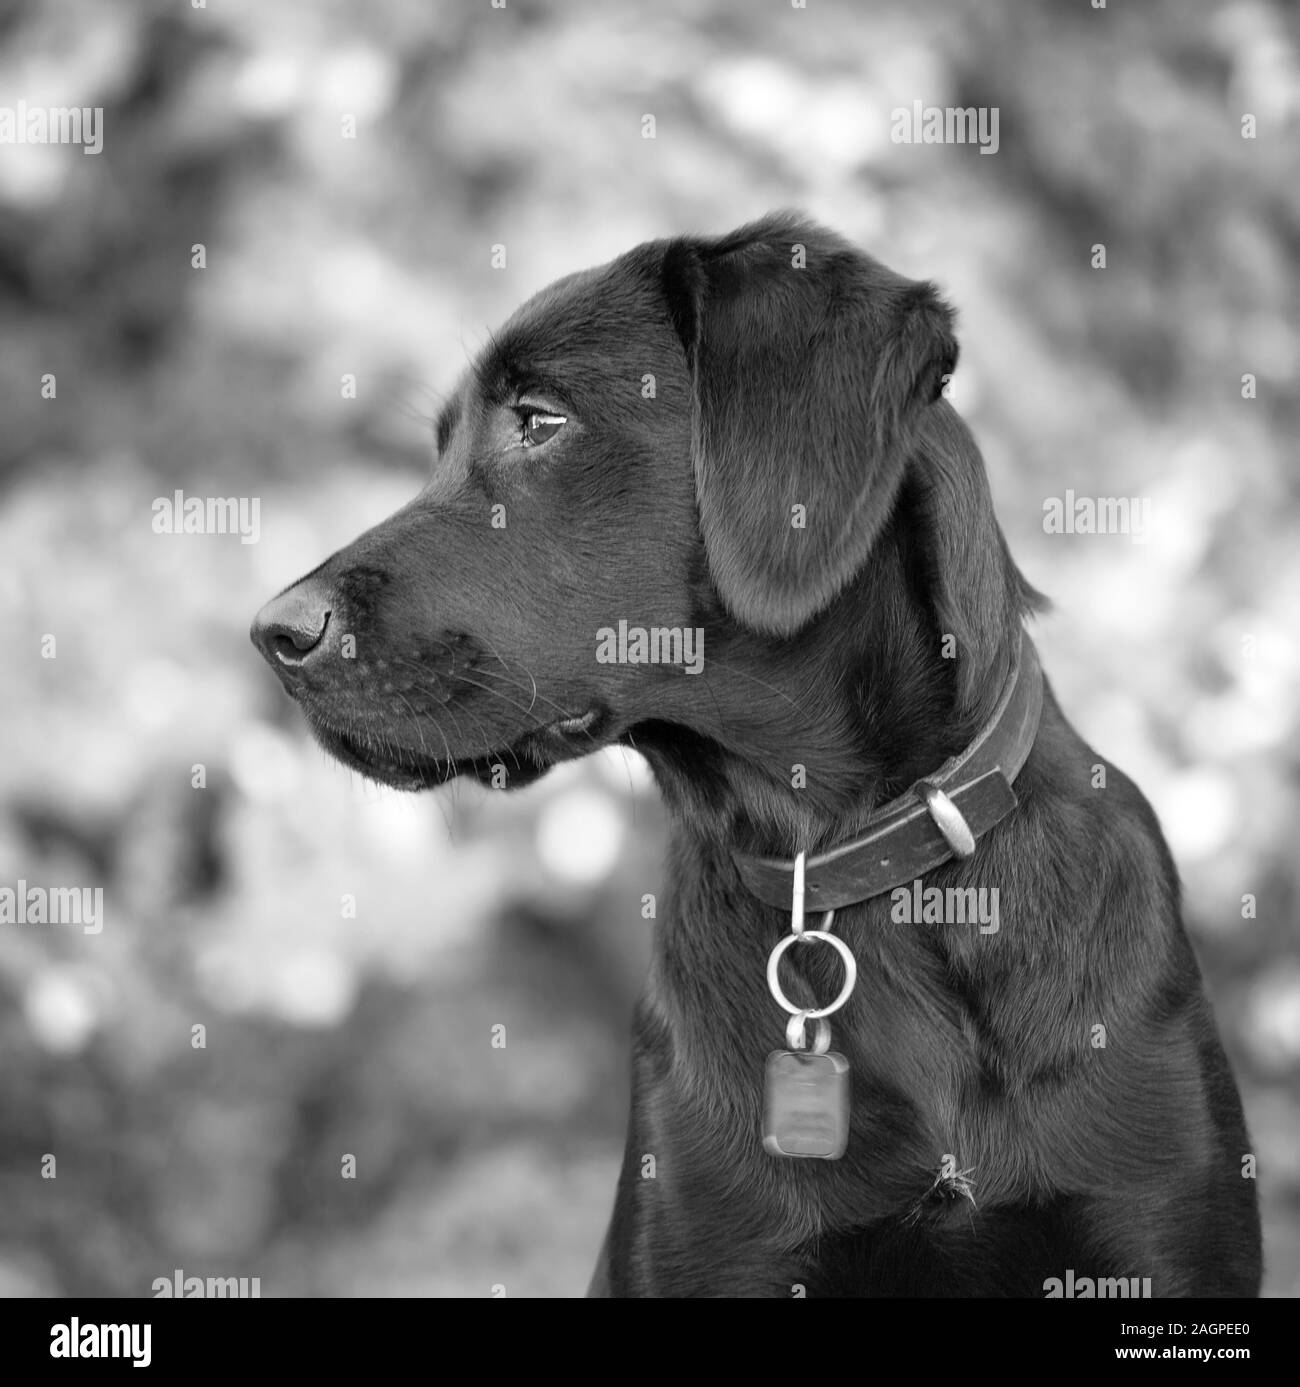 Against a blurred soft-focussed background, a young Labrador is distracted during outdoor training, her eyes fixed on something she finds interesting. Stock Photo